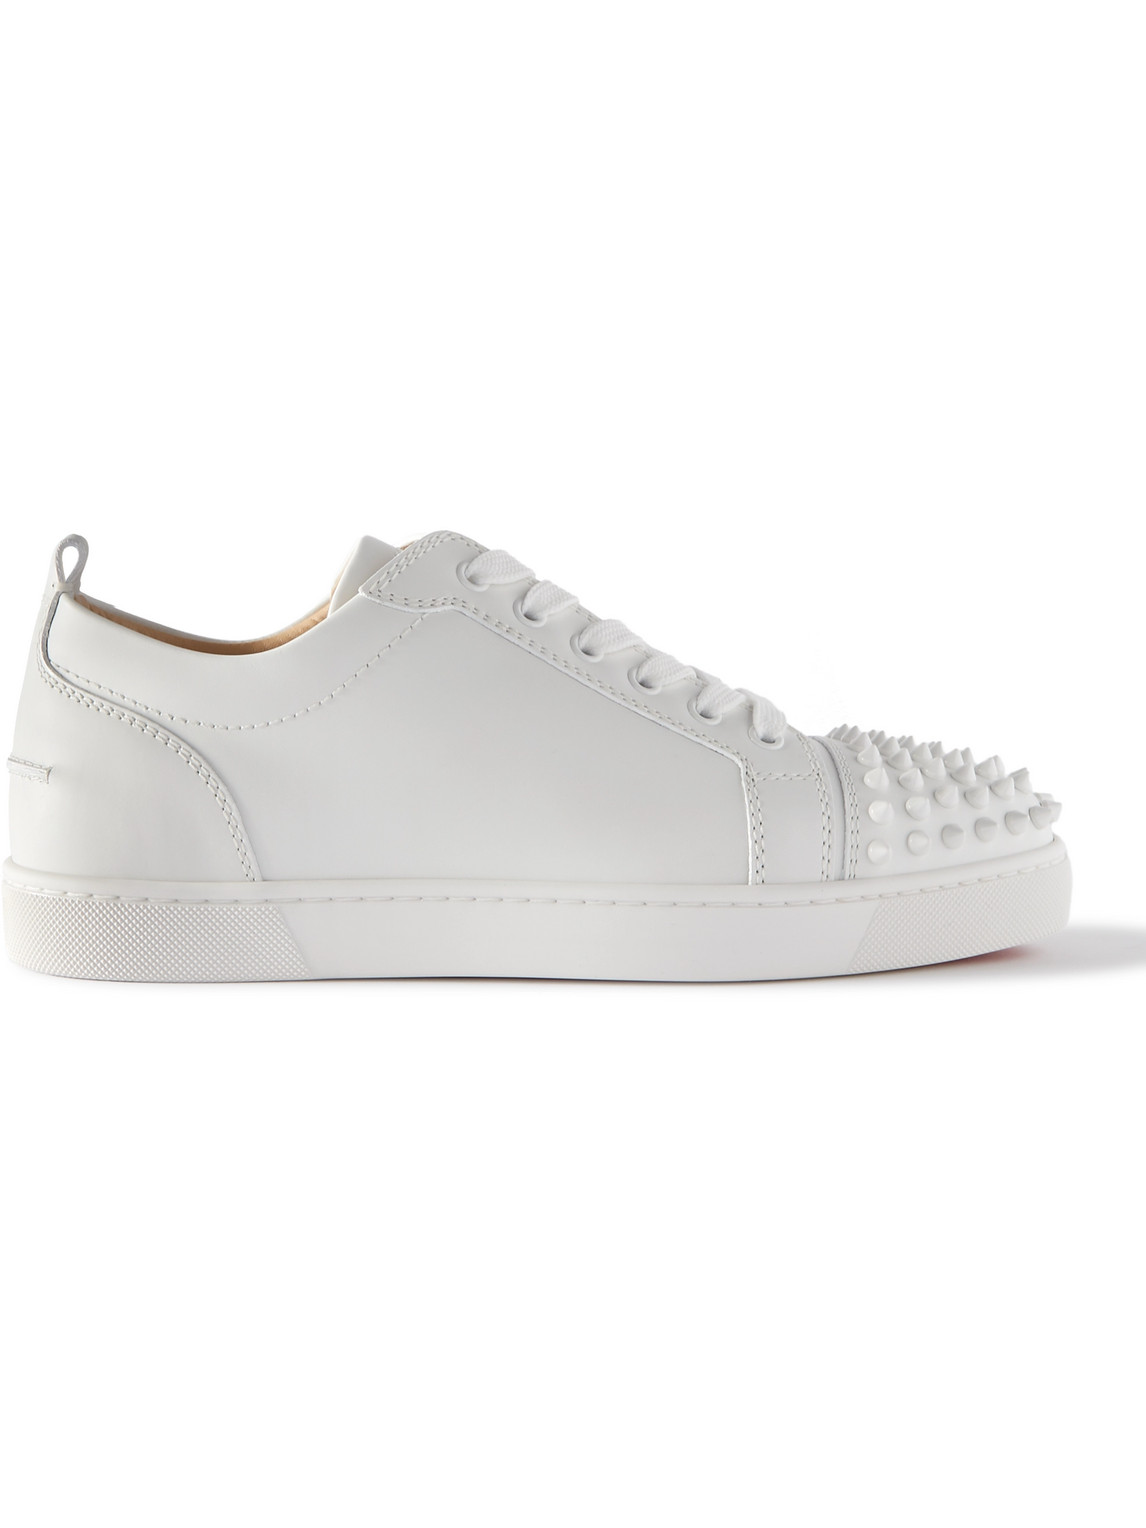 CHRISTIAN LOUBOUTIN LOUIS JUNIOR SPIKES CAP-TOE LEATHER SNEAKERS